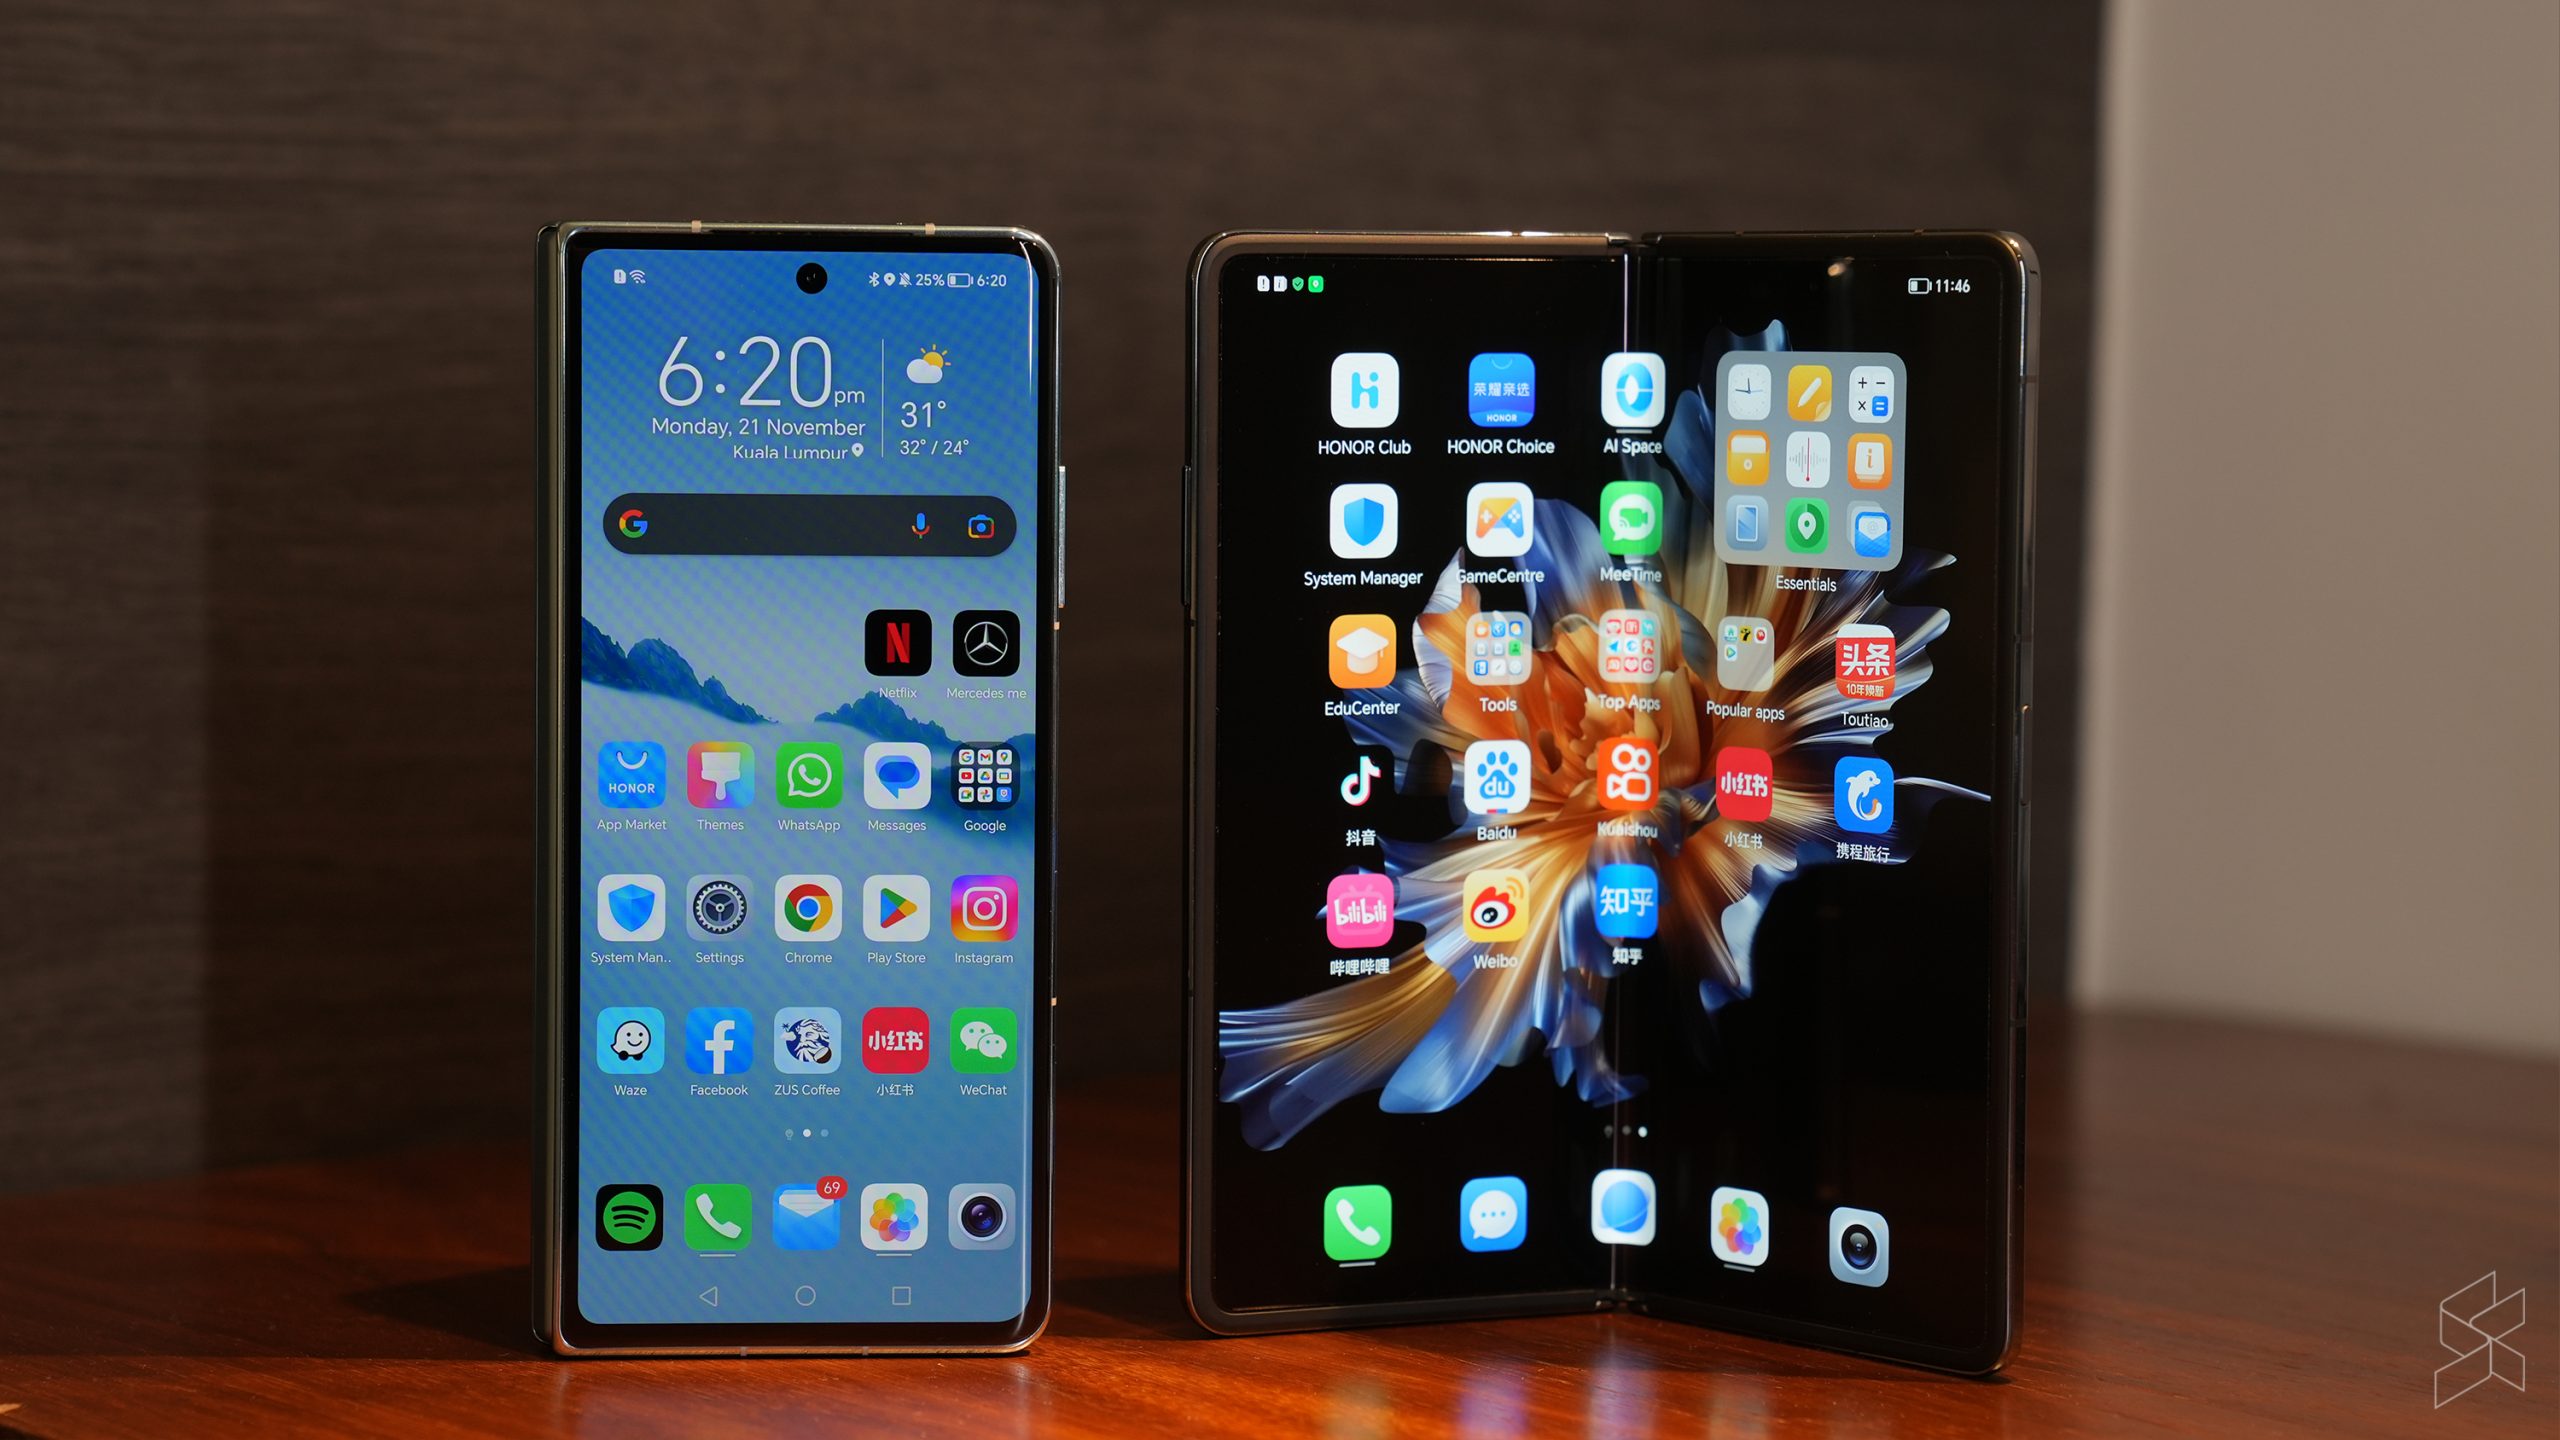 Honor Magic Vs hands-on: Honor's second—and better—attempt at